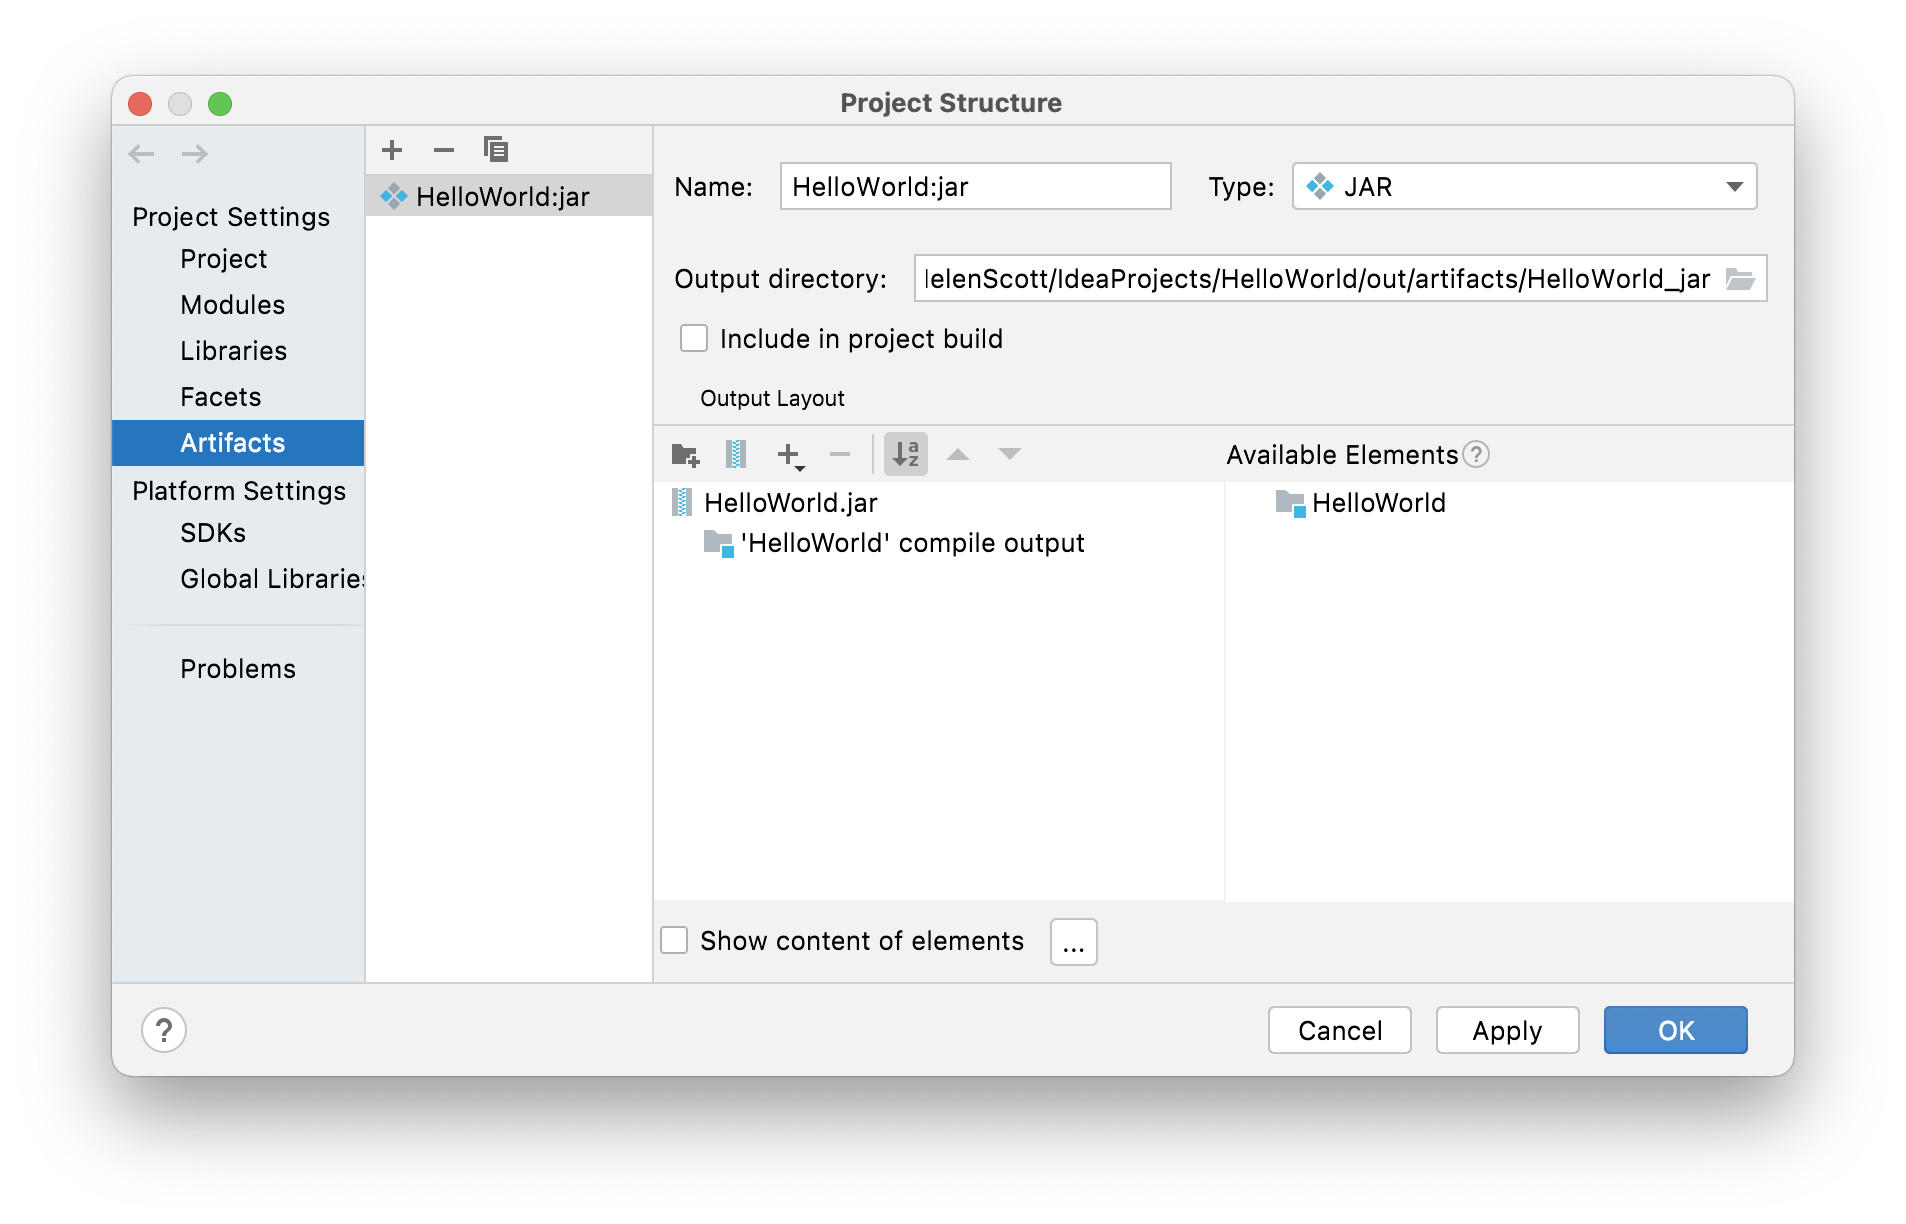 Hello World JAR in the Project Structure dialog